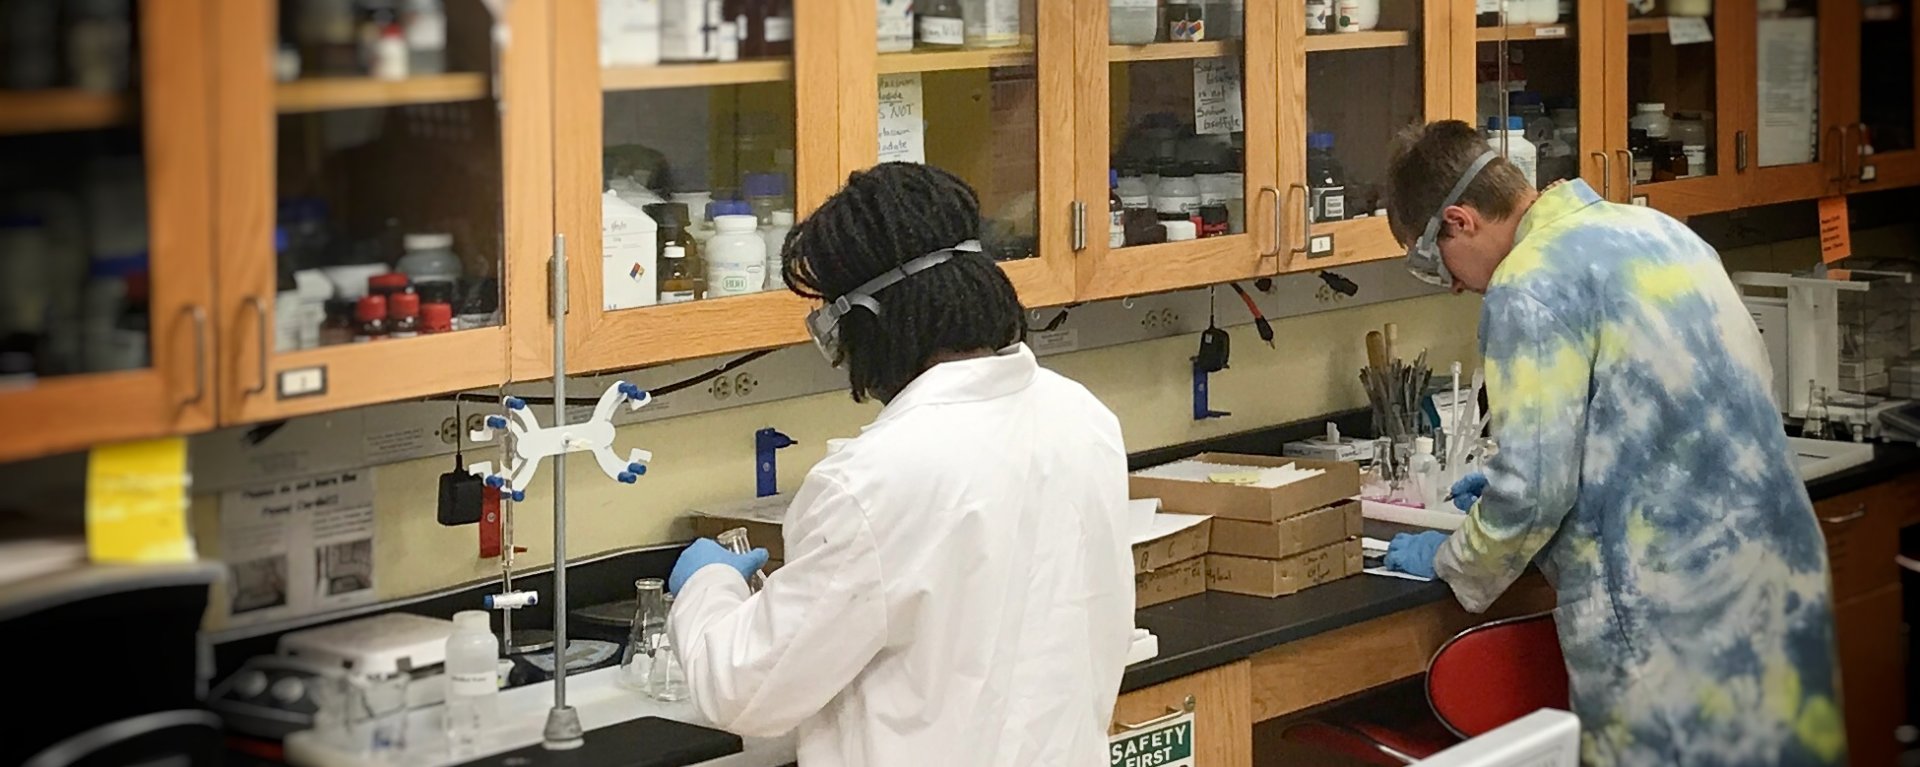 Students working in an active lab